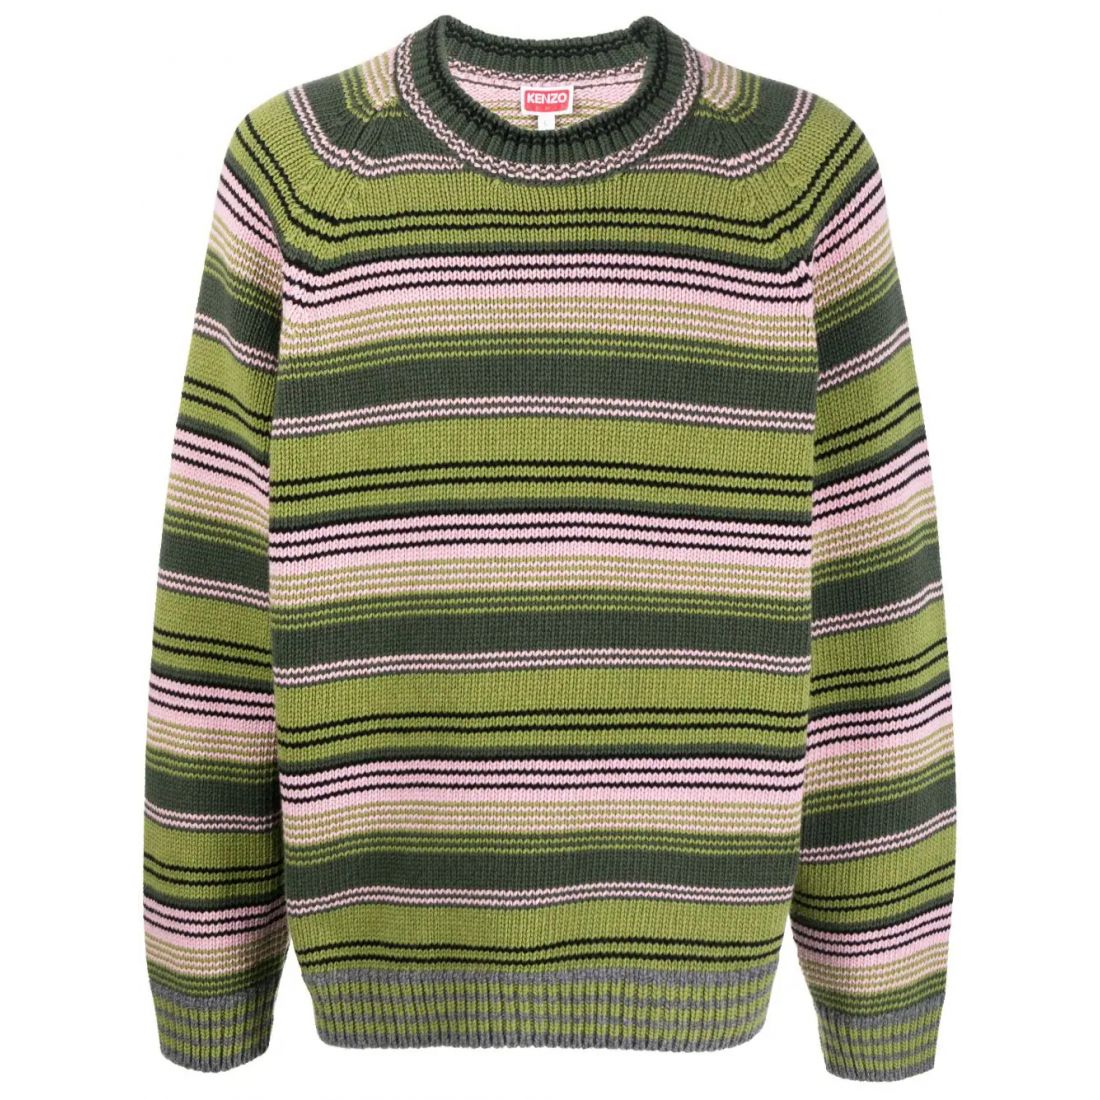 Kenzo - Pull 'Rue Vivienne Striped' pour Hommes